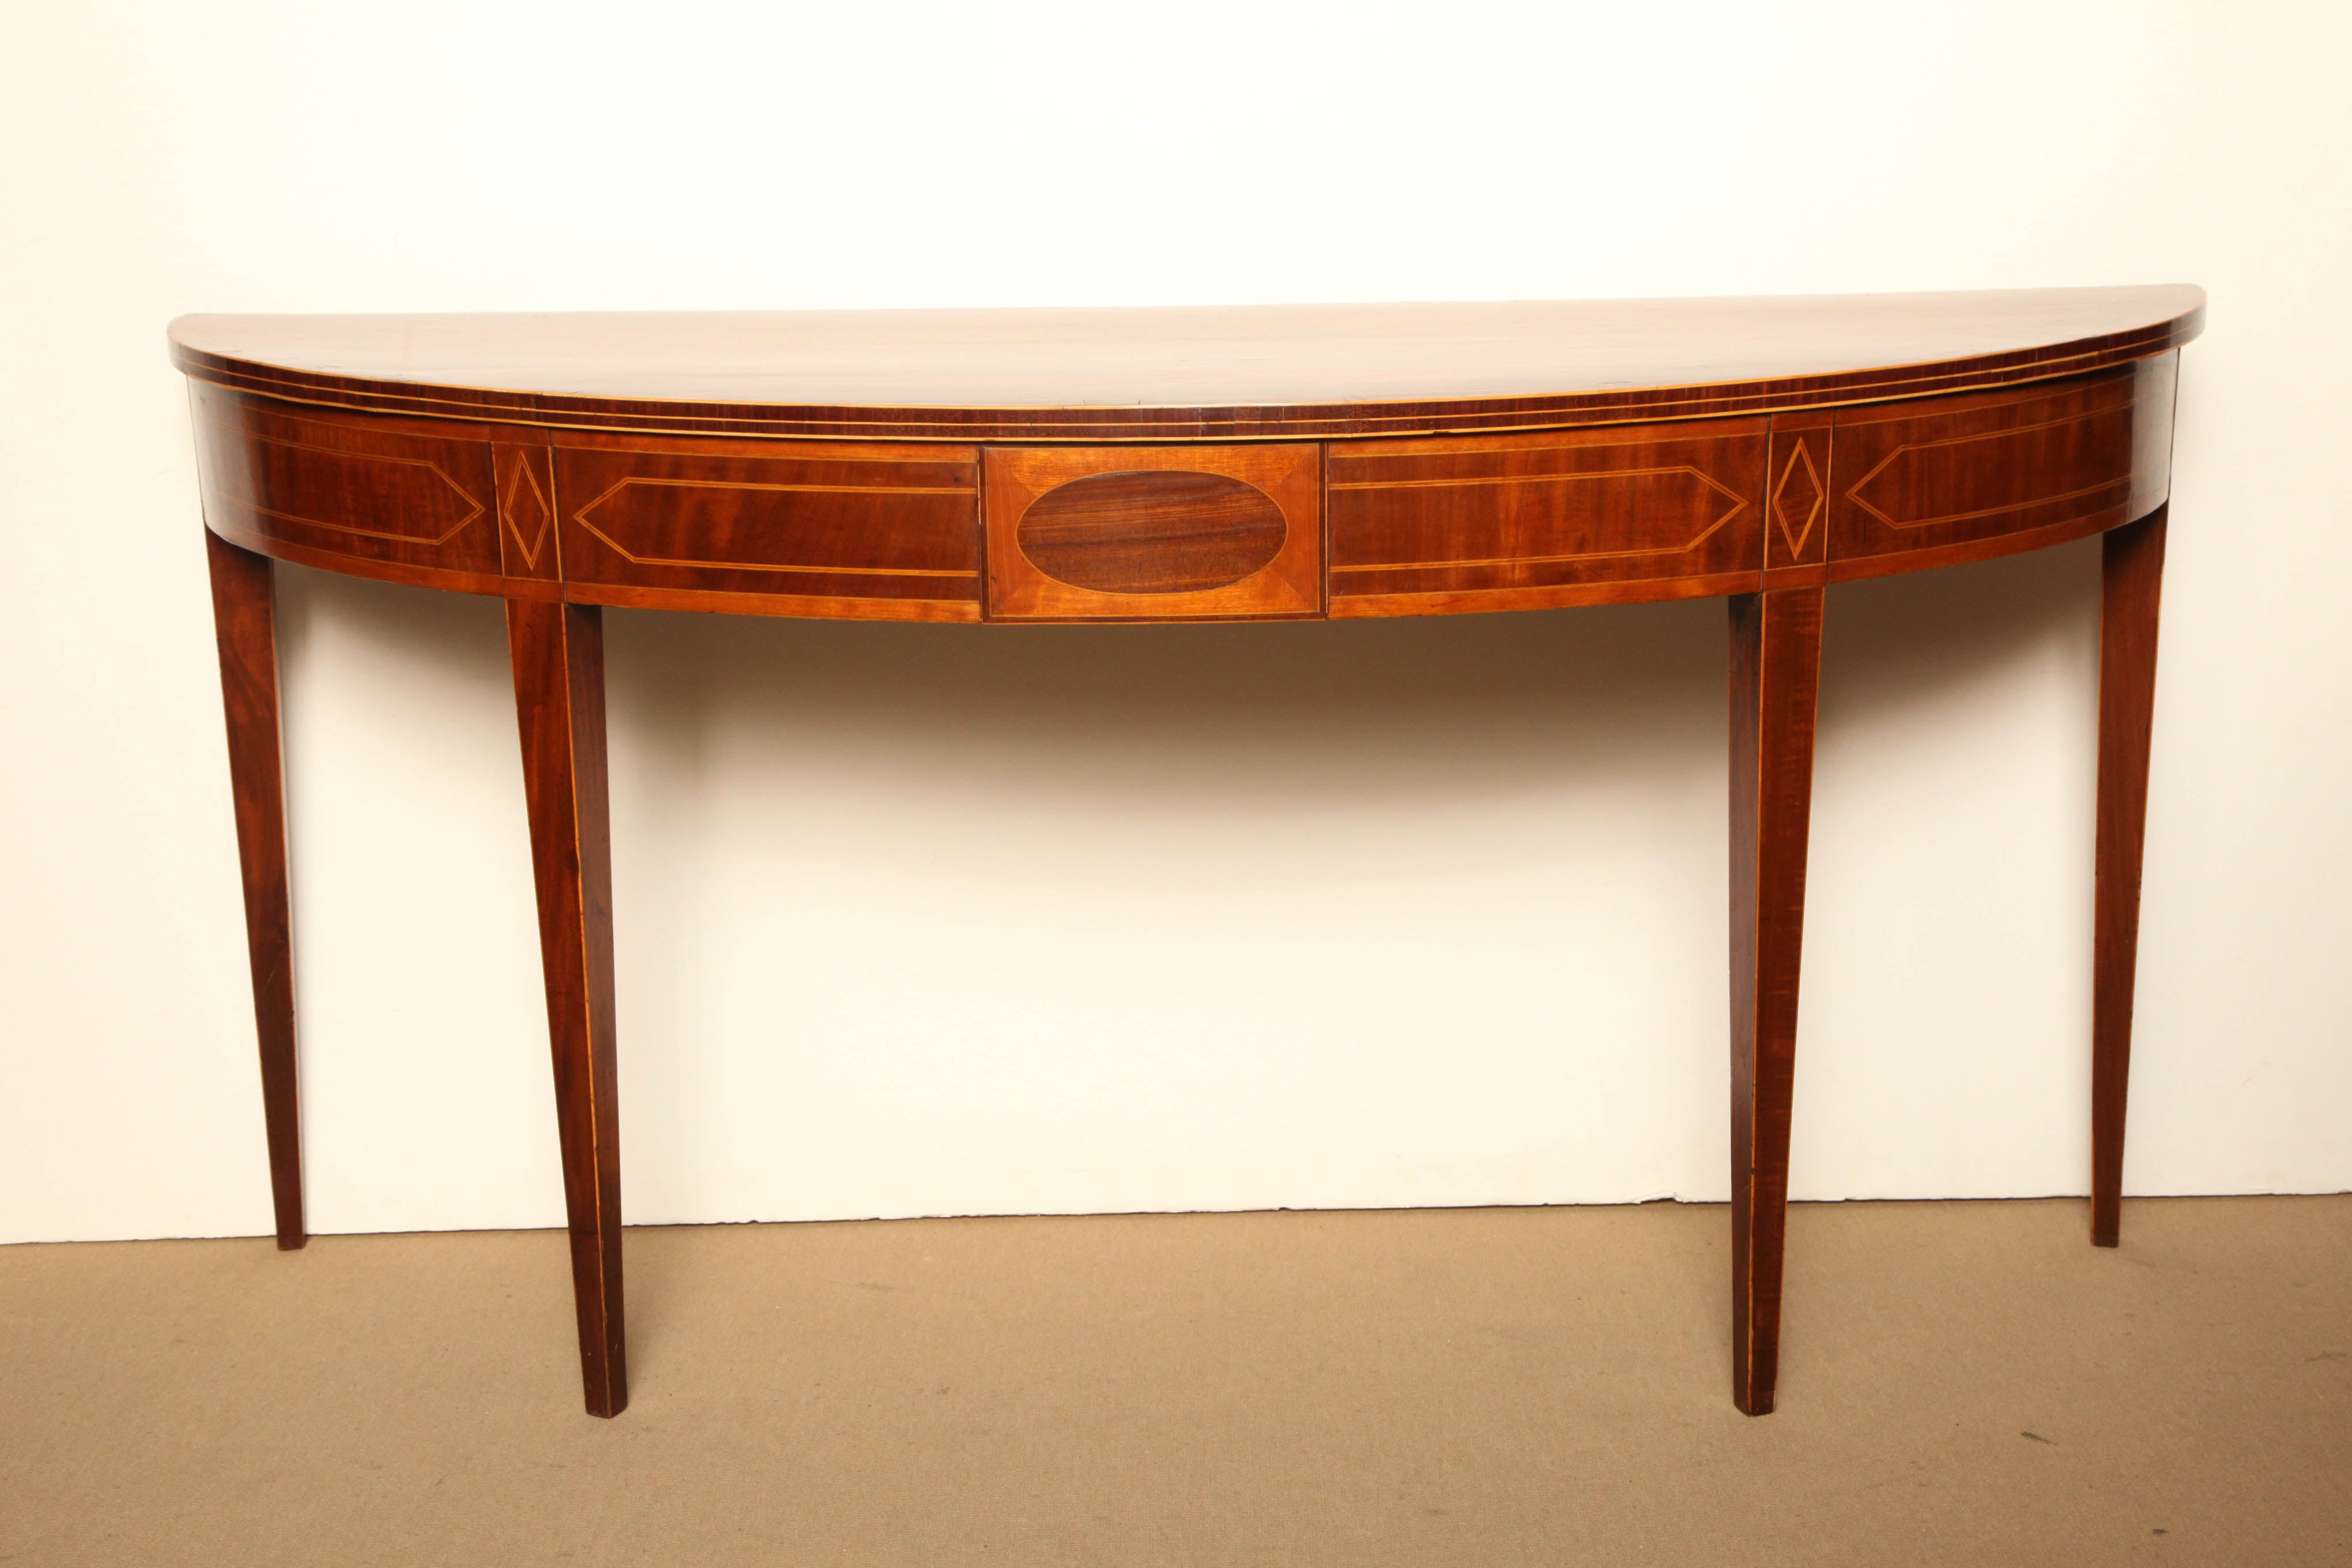 Exceptional Early 19th Century Inlaid Mahogany "D" End Console